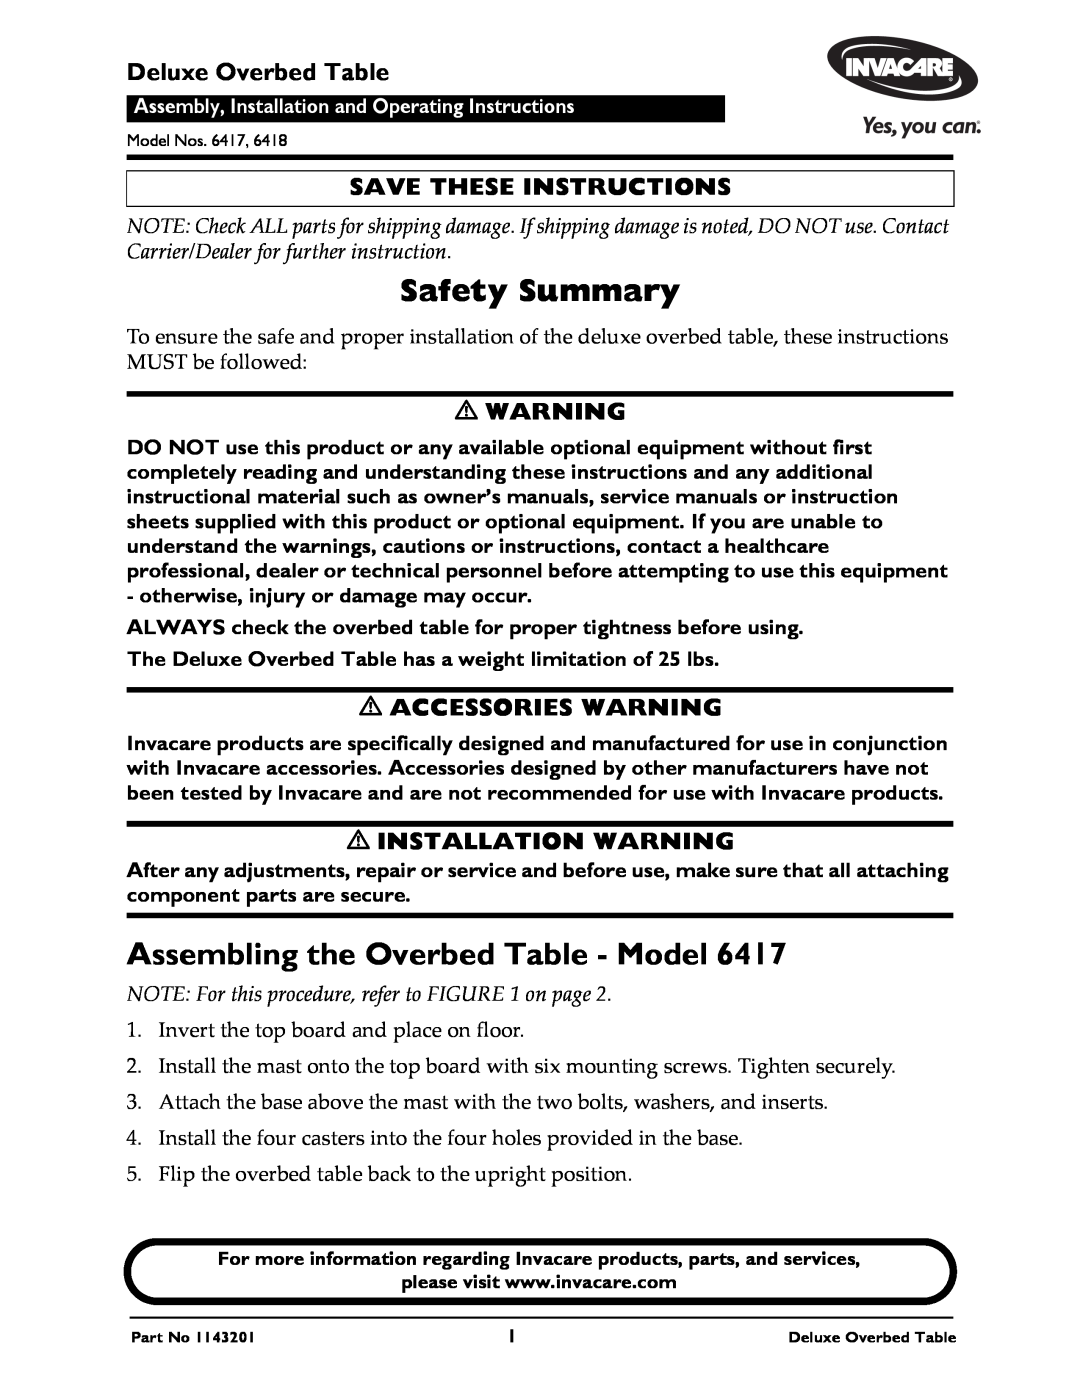 Invacare 6418 owner manual Safety Summary, Assembling the Overbed Table - Model, Deluxe Overbed Table, Accessories Warning 